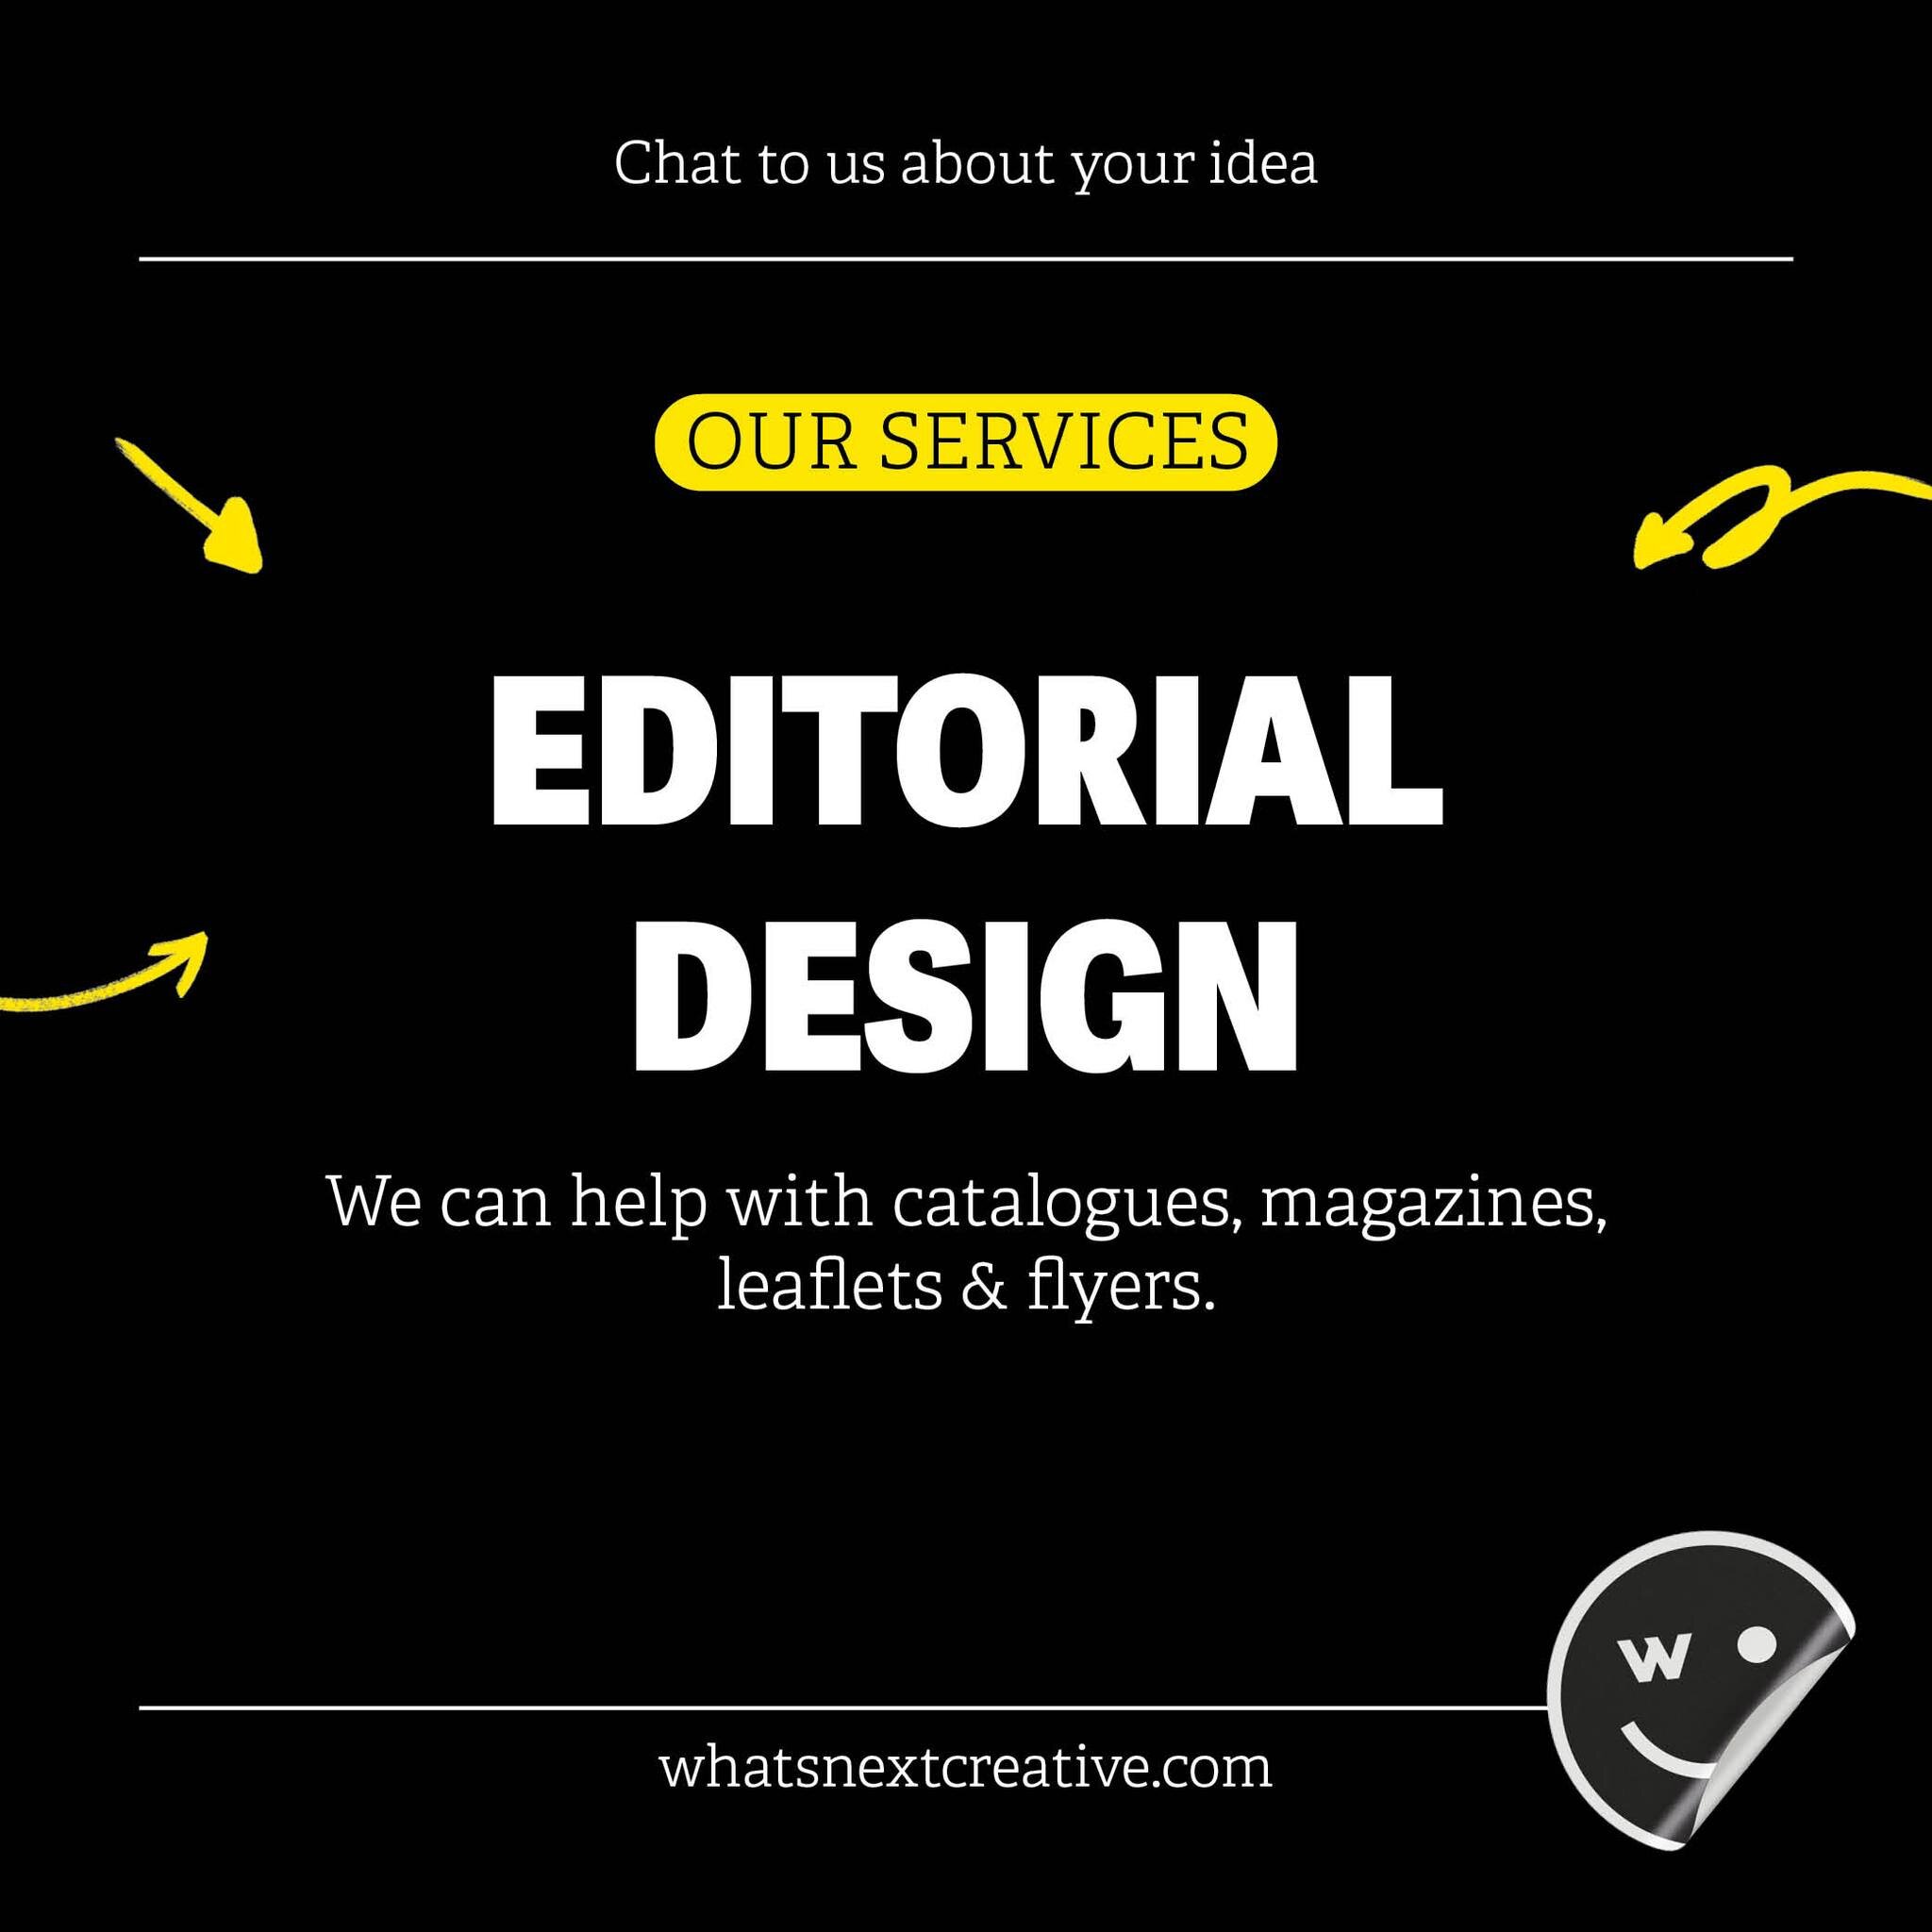 Do you need product catalogue but have no idea how to start organising the wealth of information? Or maybe you need help designing some flyers to promote your business and services...we've got you covered ✅

We can help with catalogues, magazines, le